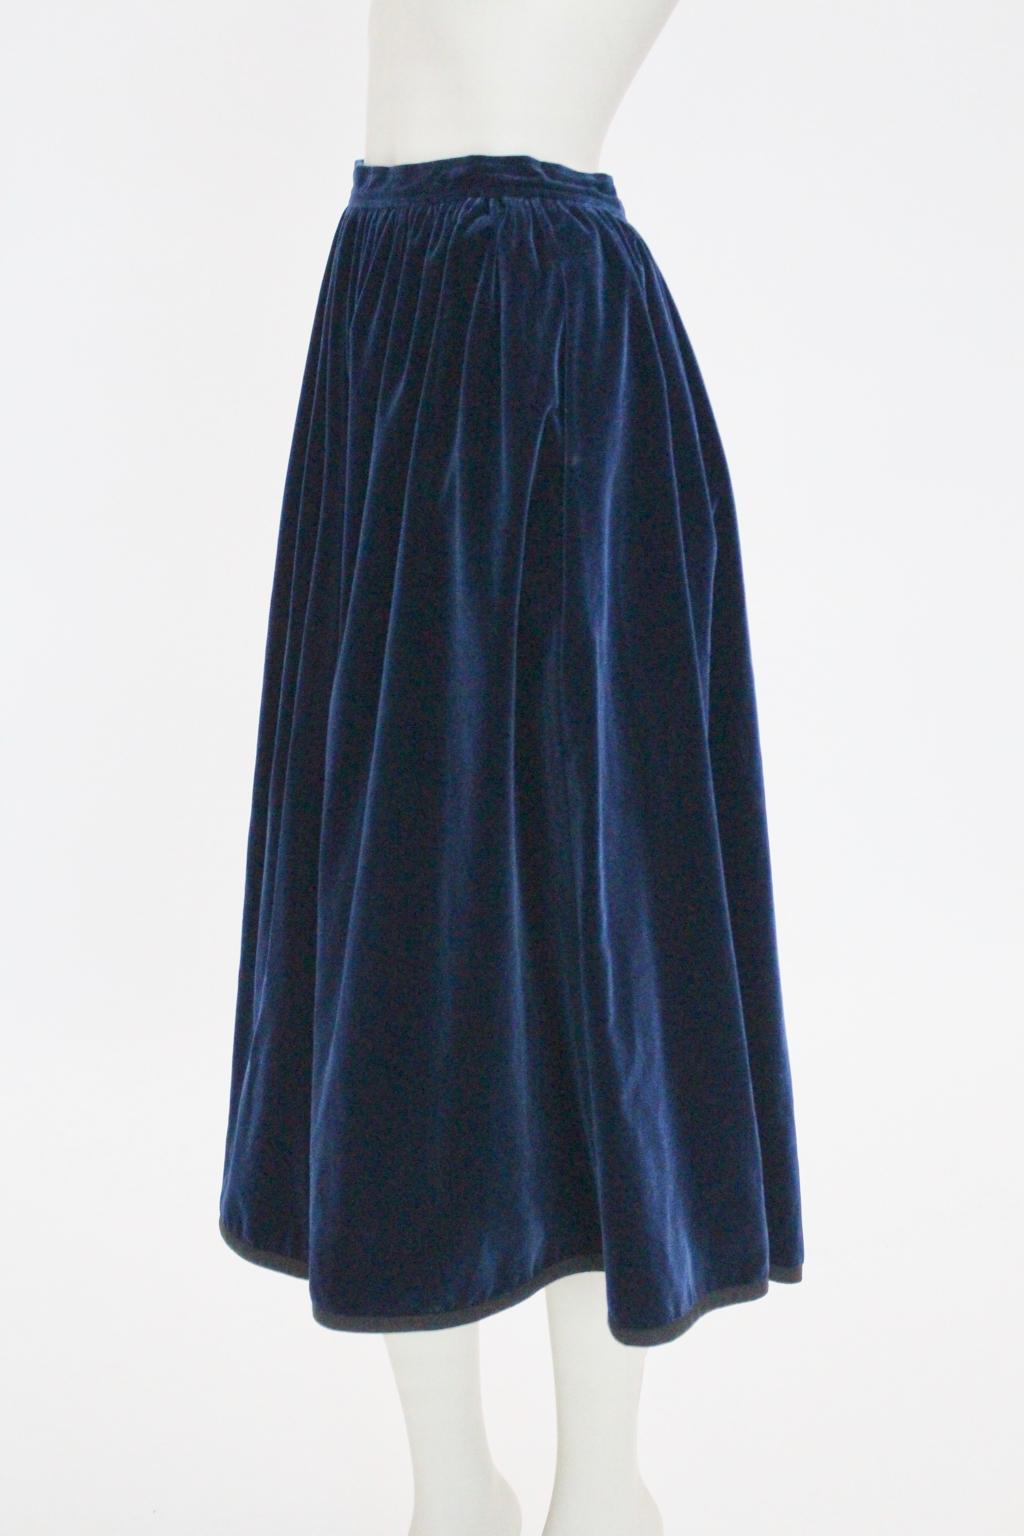 Blue Velvet Pleated Vintage Skirt by Yves Saint Laurent Rive Gauche In Good Condition For Sale In Vienna, AT